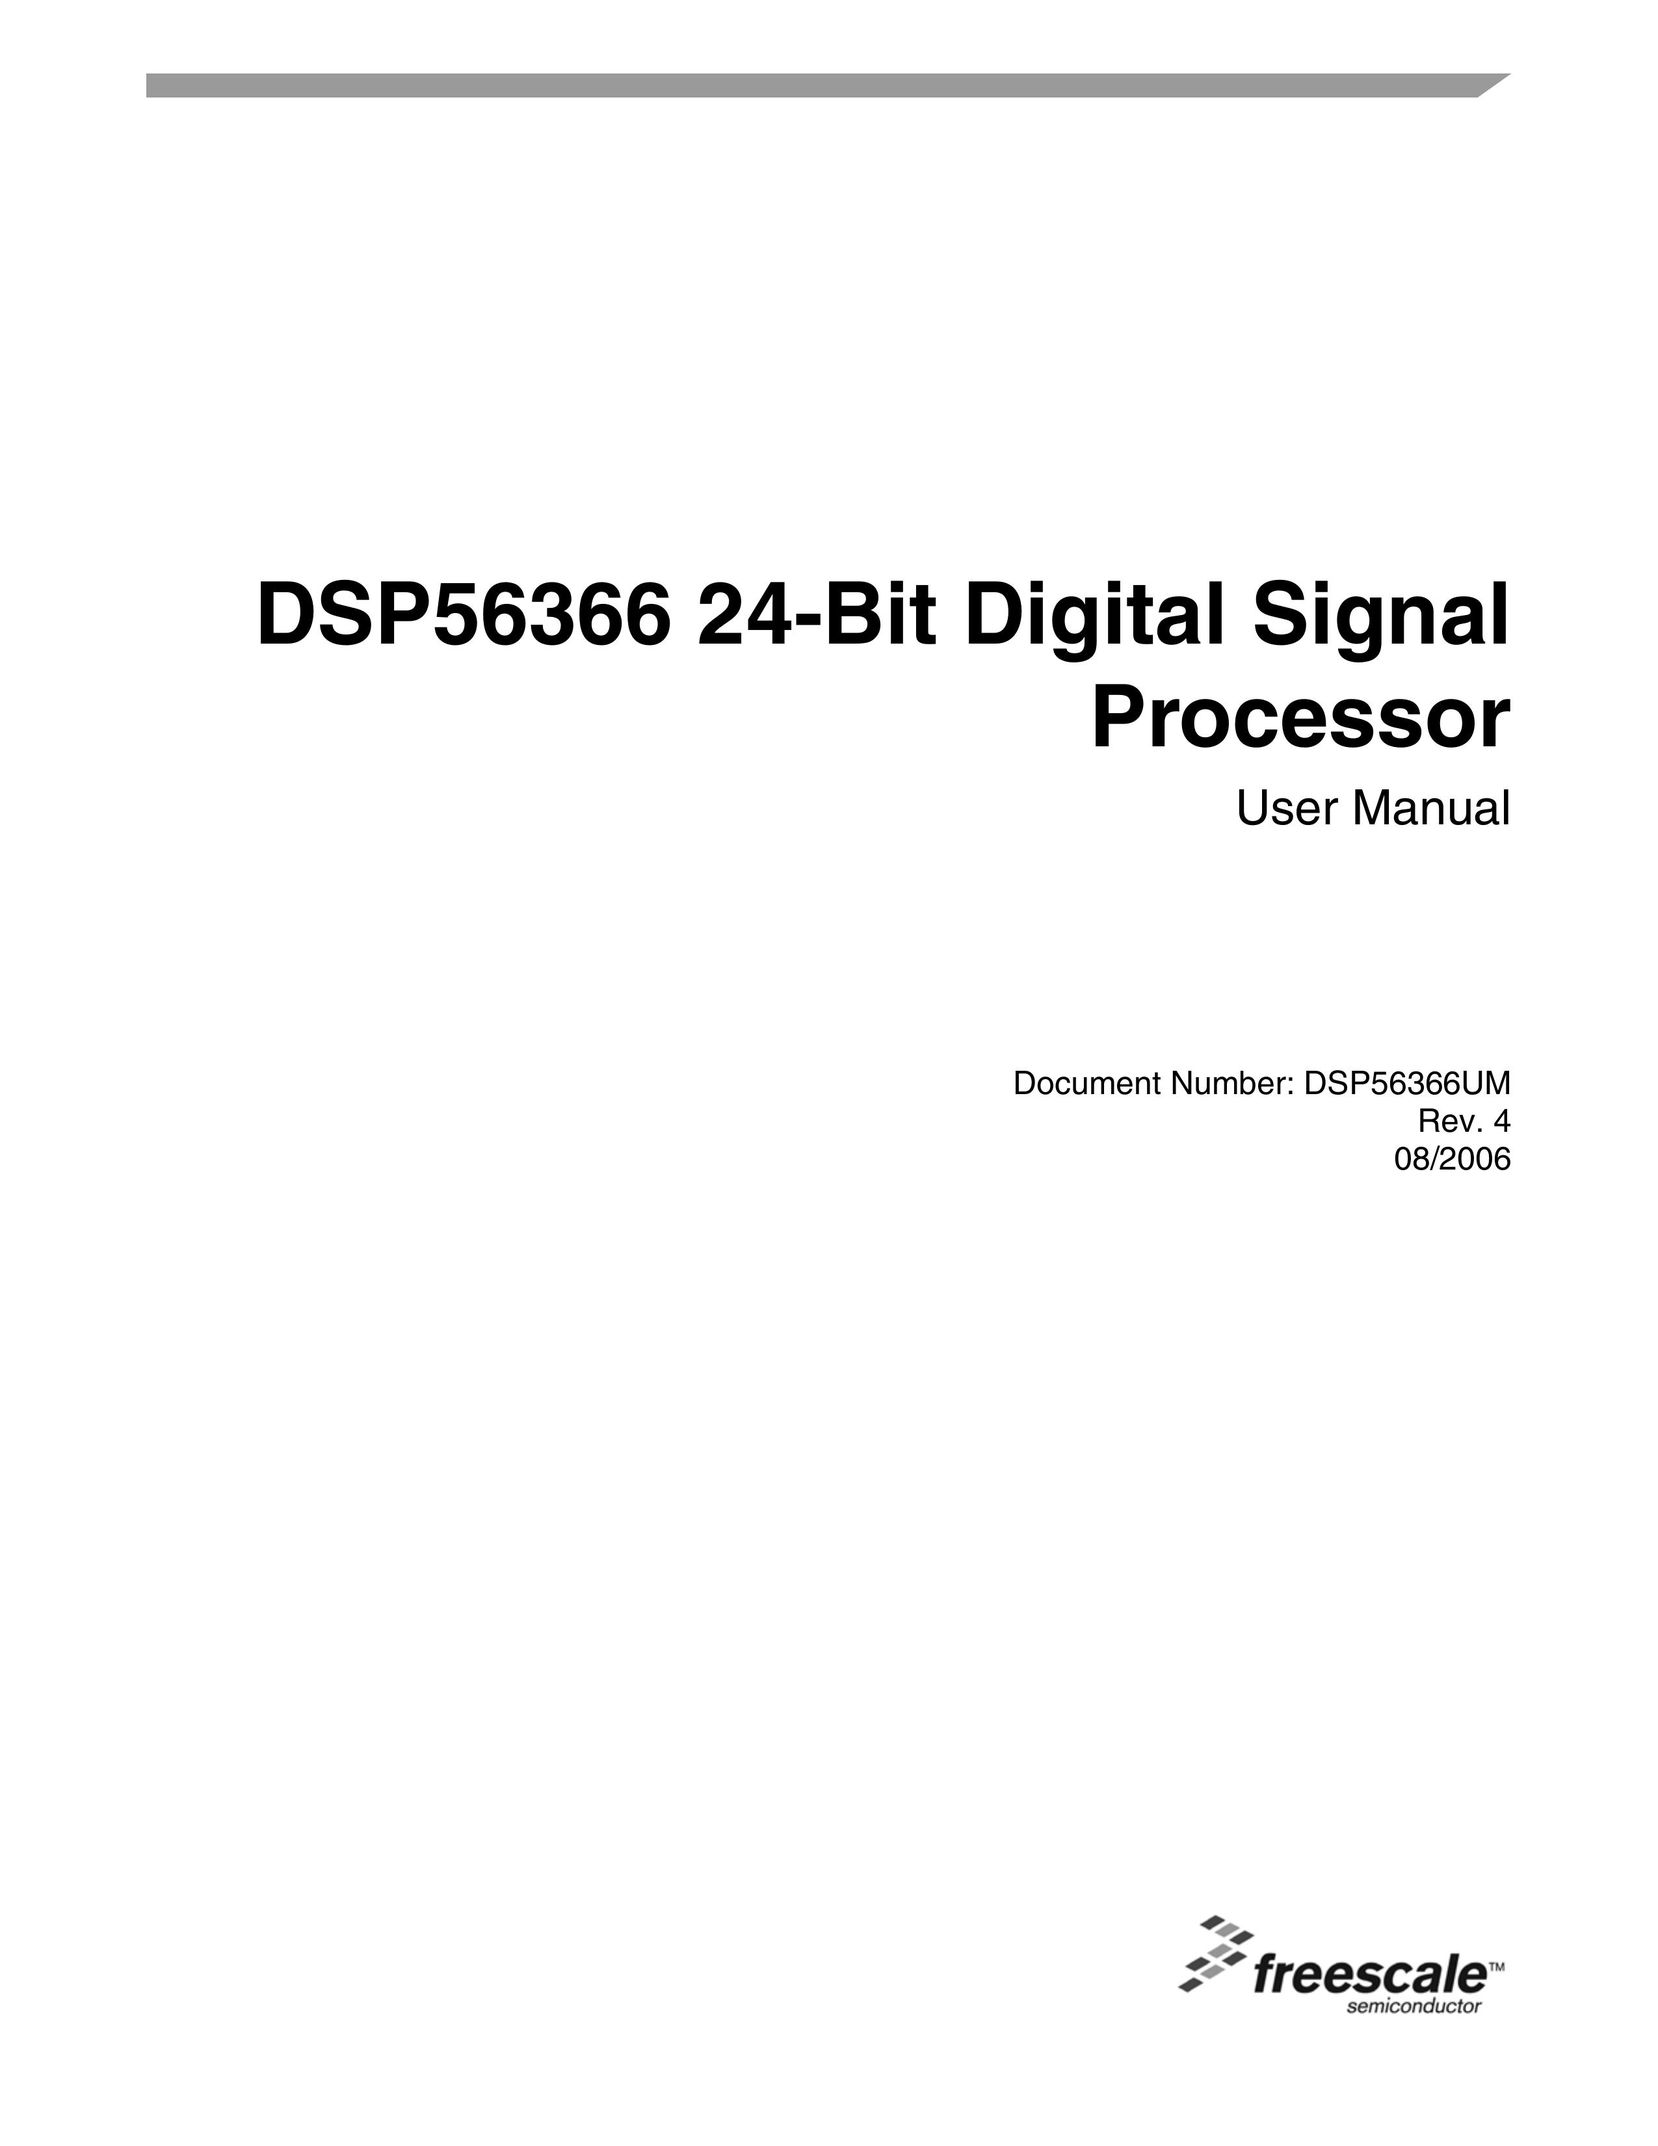 Freescale Semiconductor DSP56366 Car Stereo System User Manual